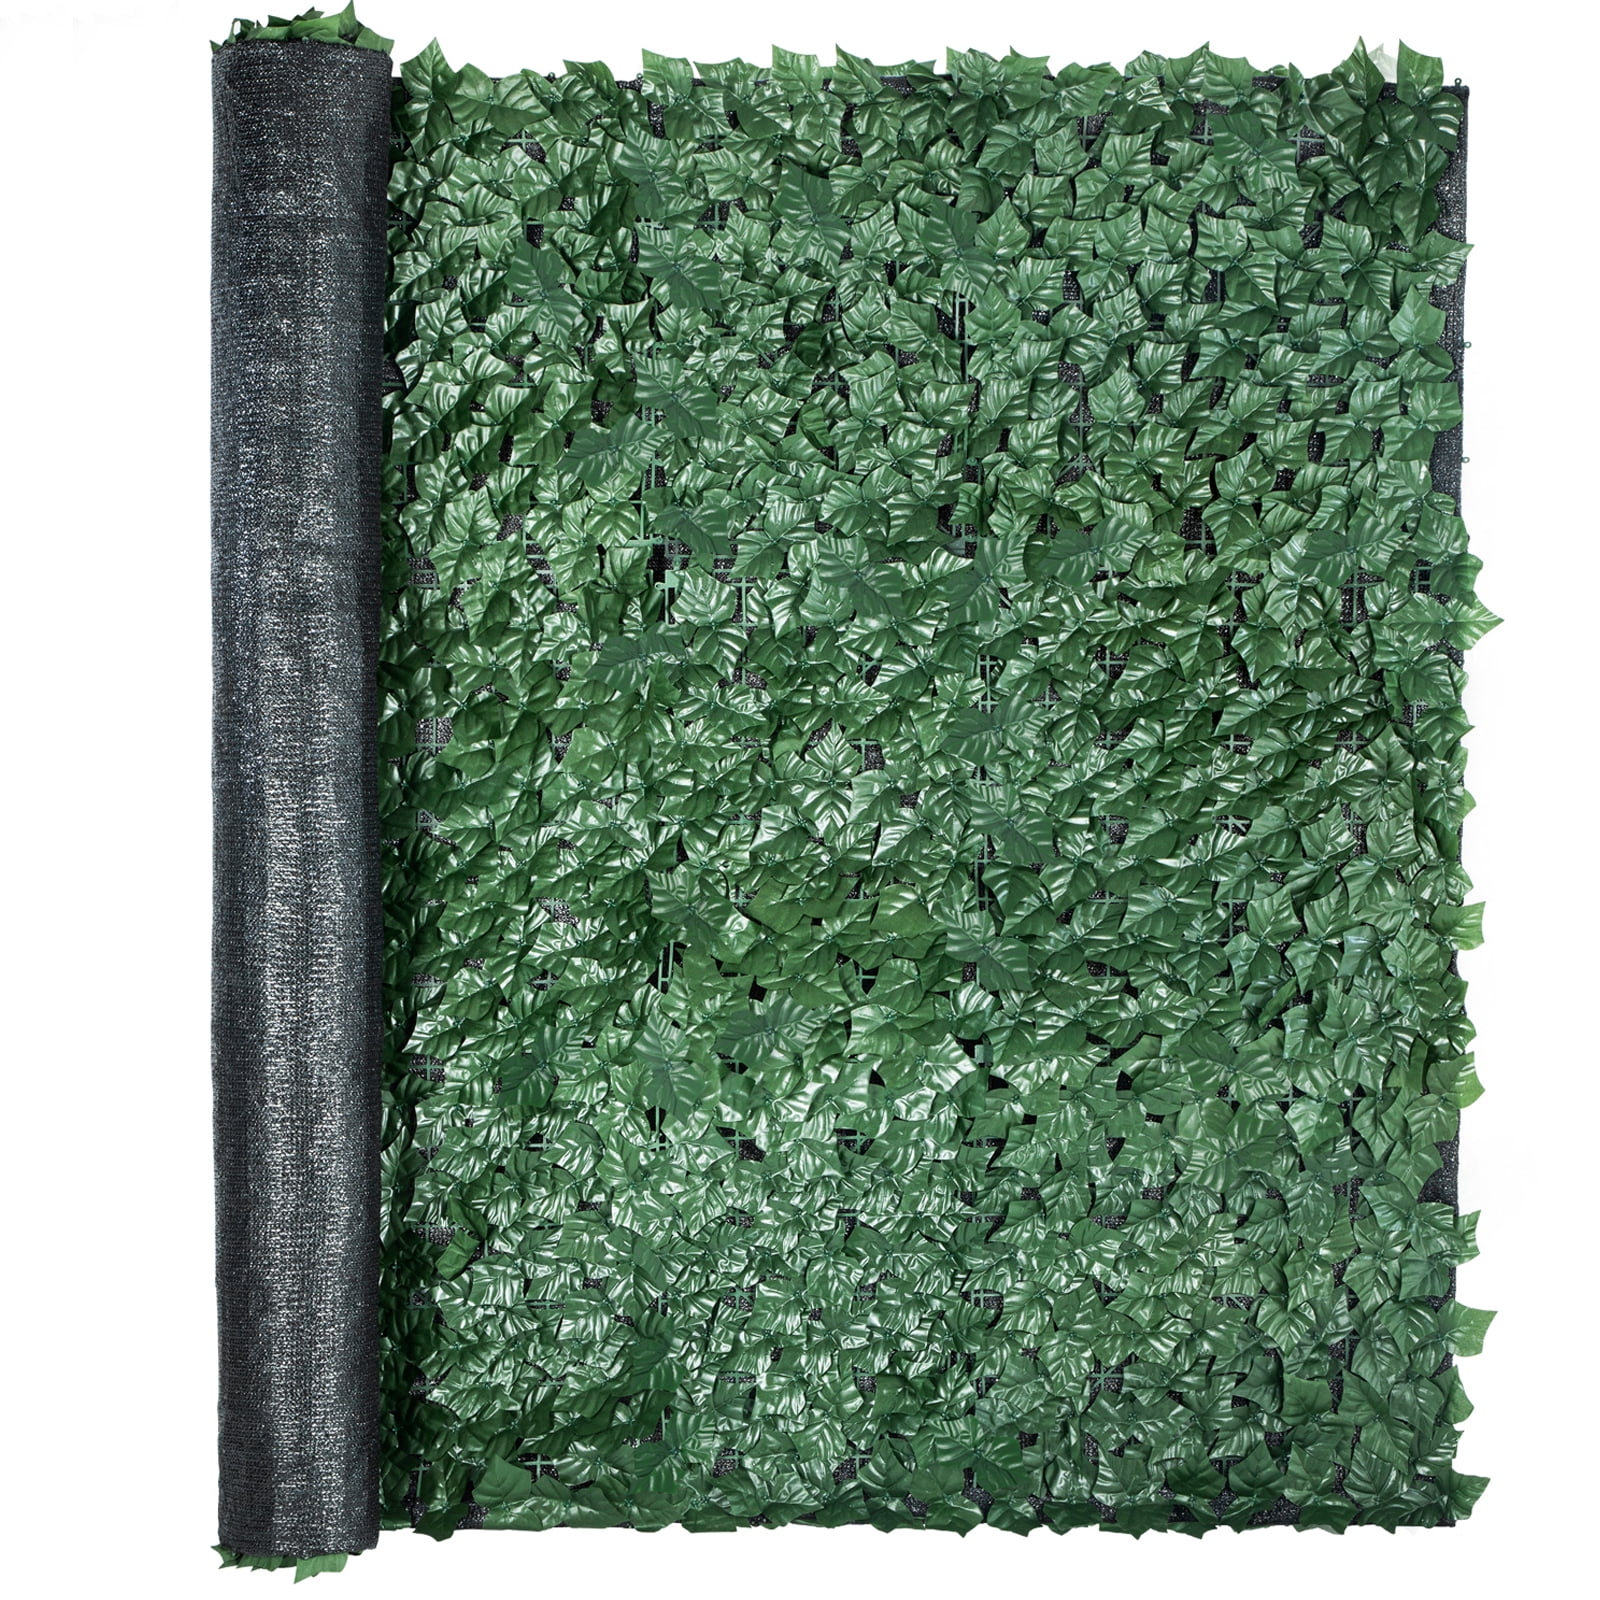 6x14 Artificial Faux Ivy Leaf Privacy Fence Screen Windscreen Shade UV Cover New 